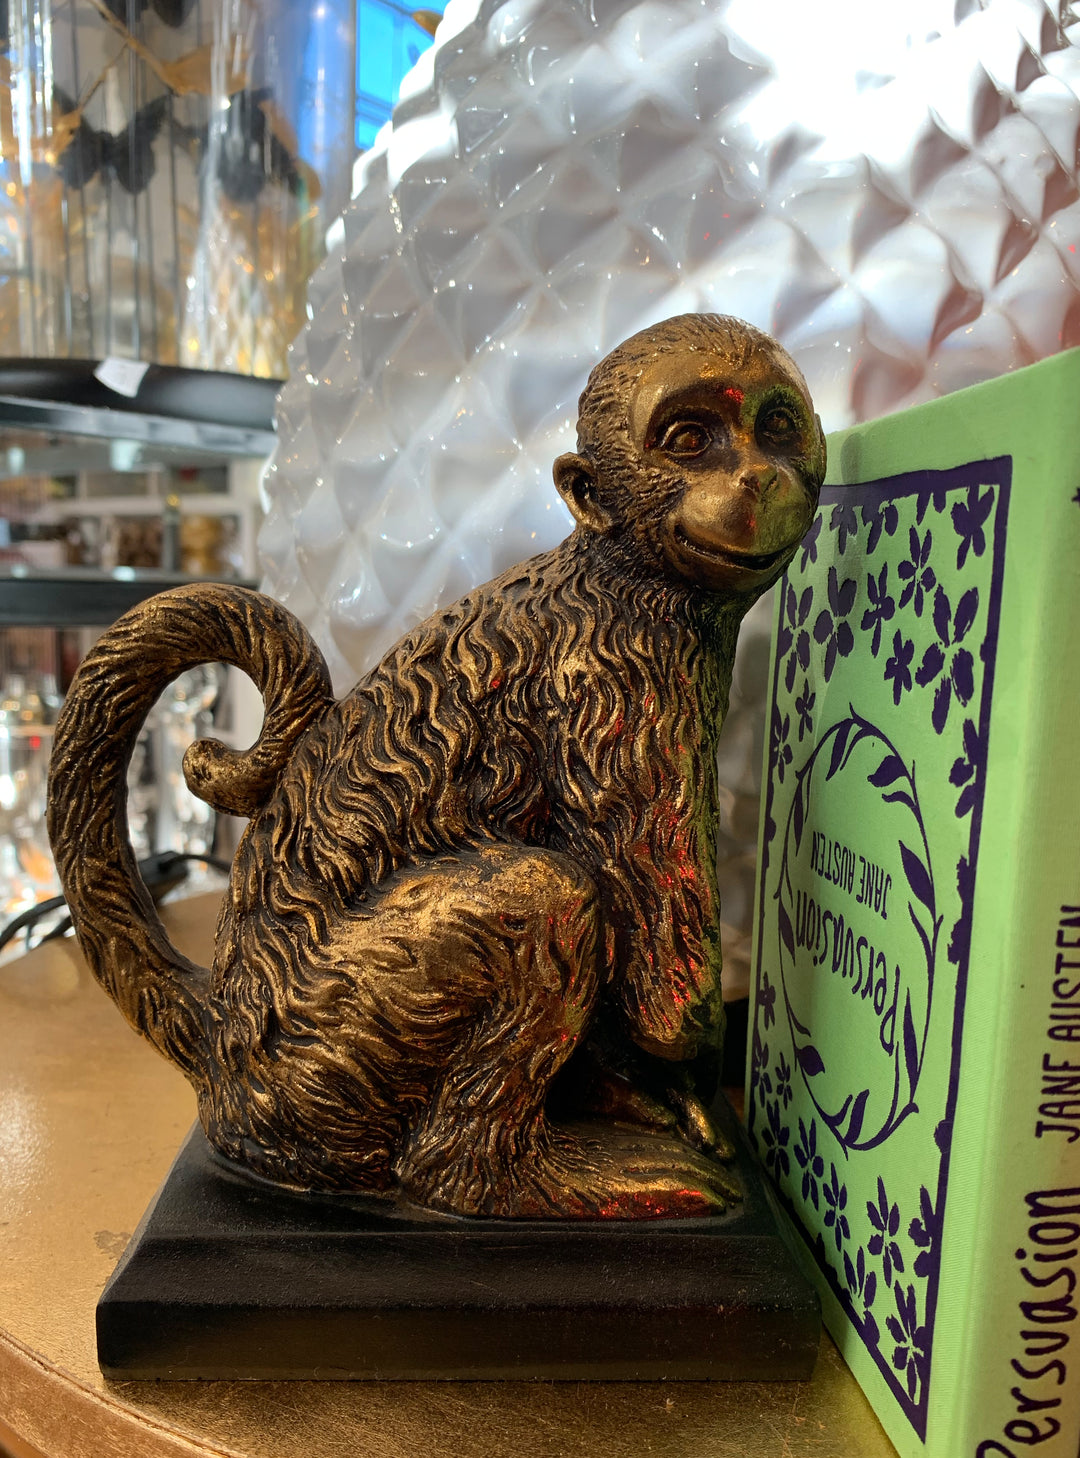 Bookends – Pair of Two Golden Monkey Bookends